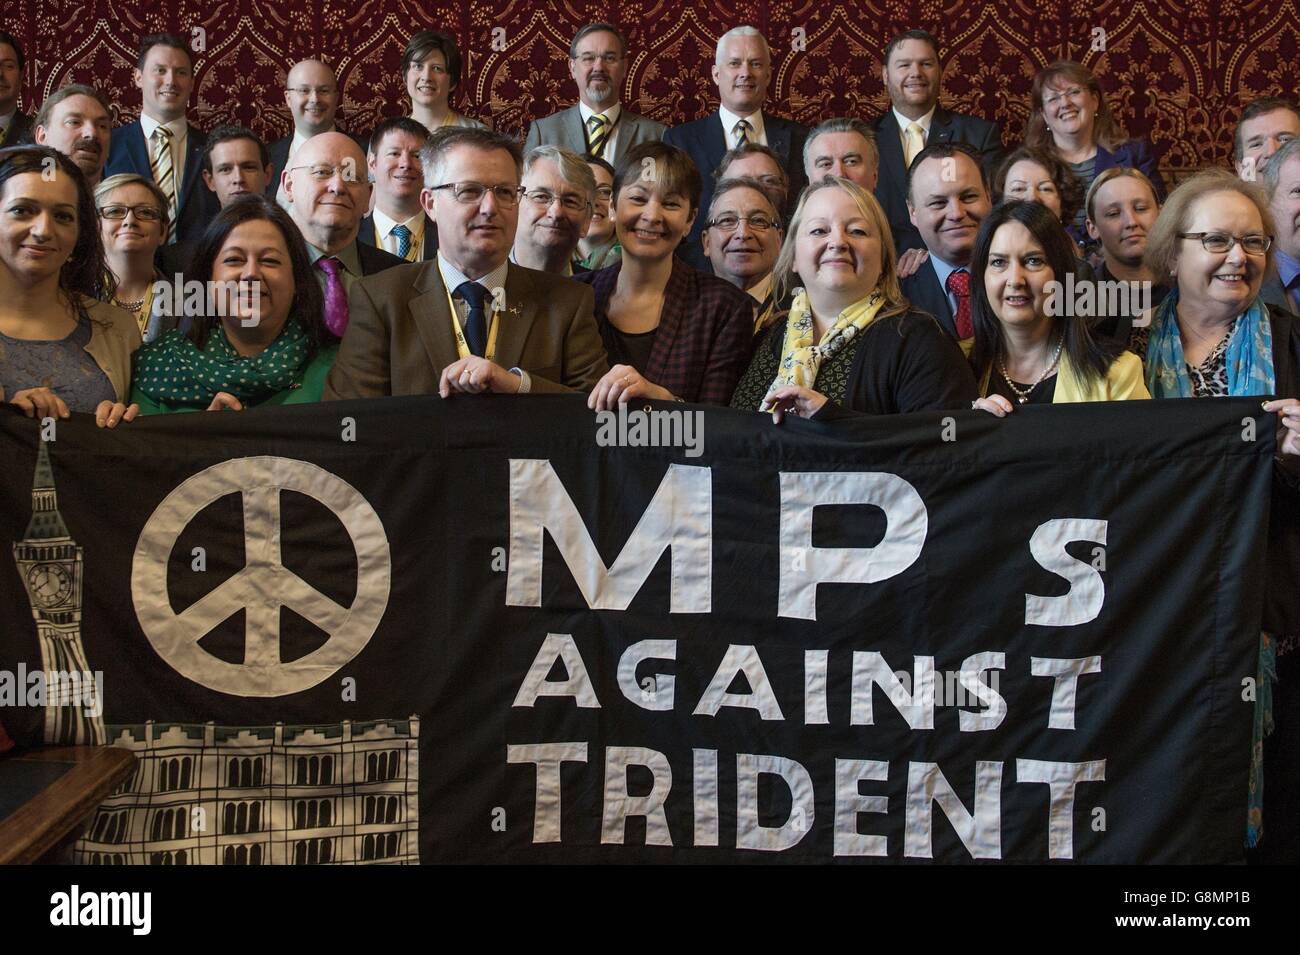 MPs from various parties hold a banner following a CND press conference to announce a Stop Trident demonstration in London on Saturday 27 February. Stock Photo